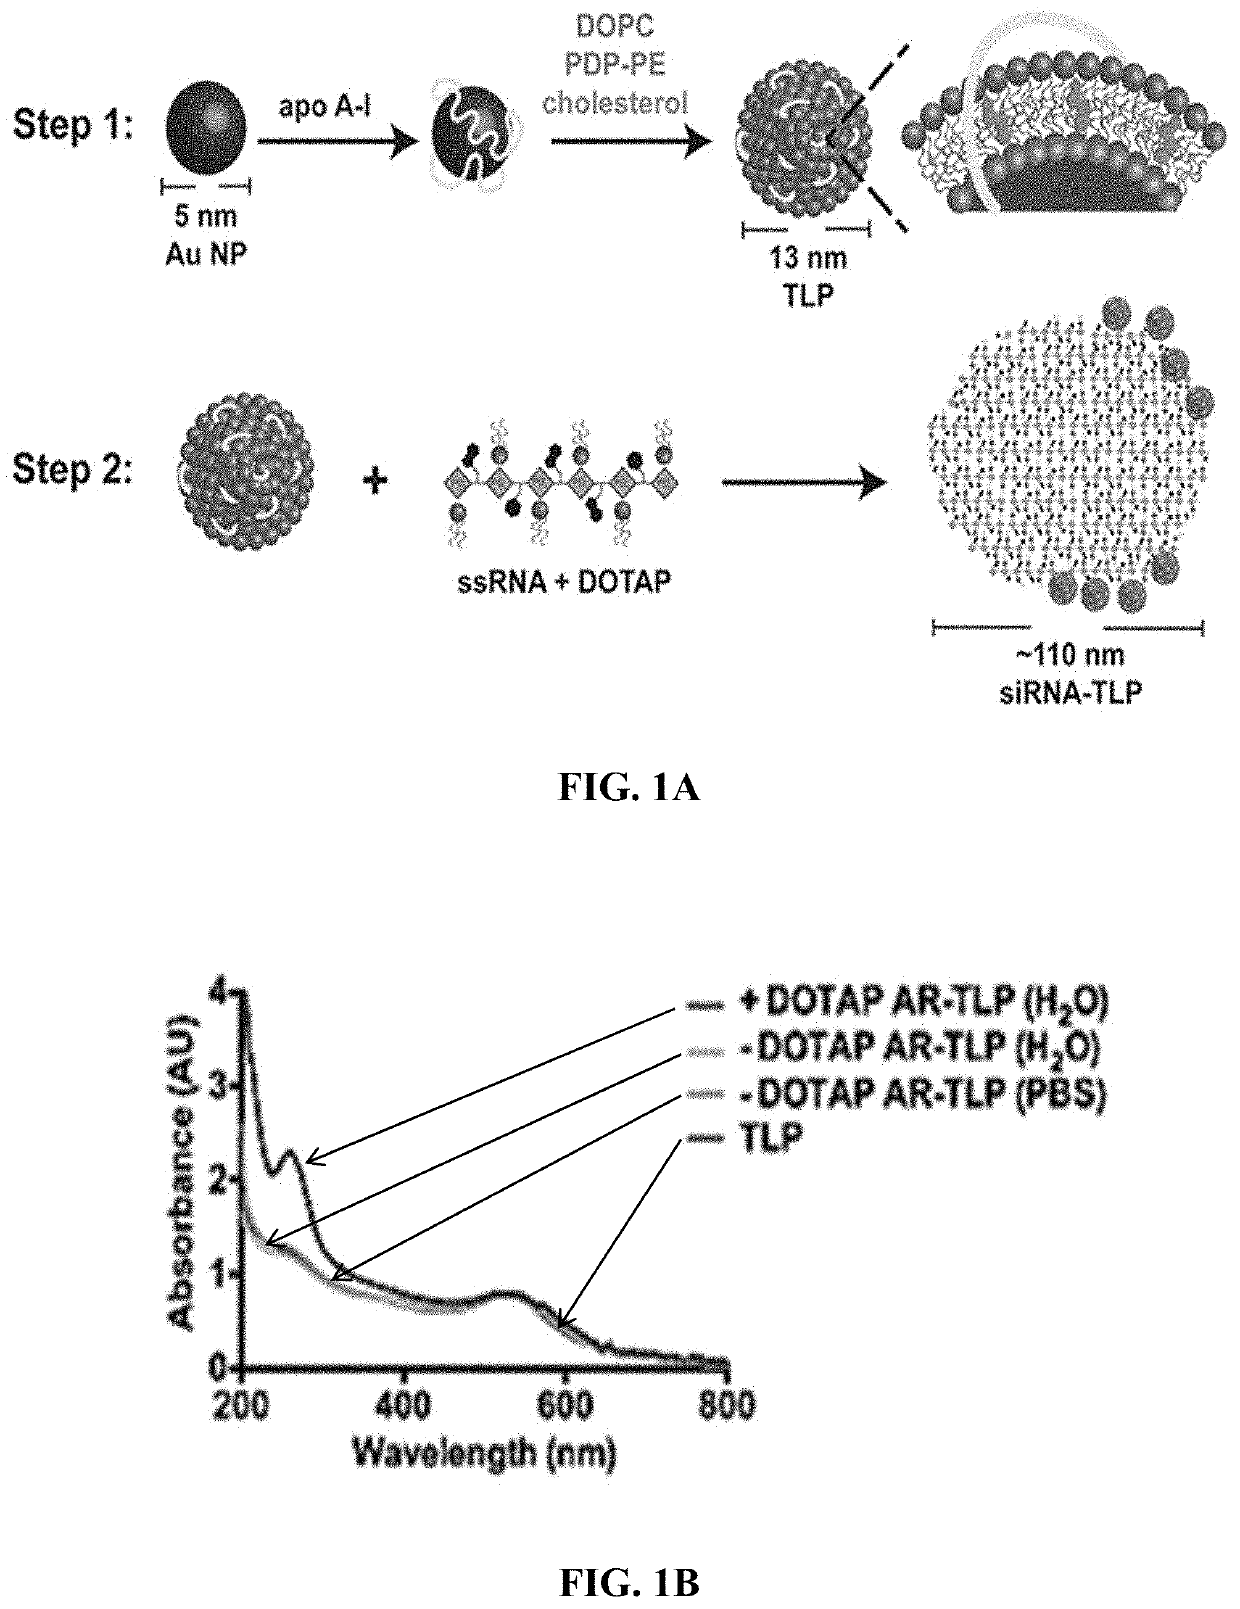 Short interfering RNA templated lipoprotein particles (siRNA-TLP)